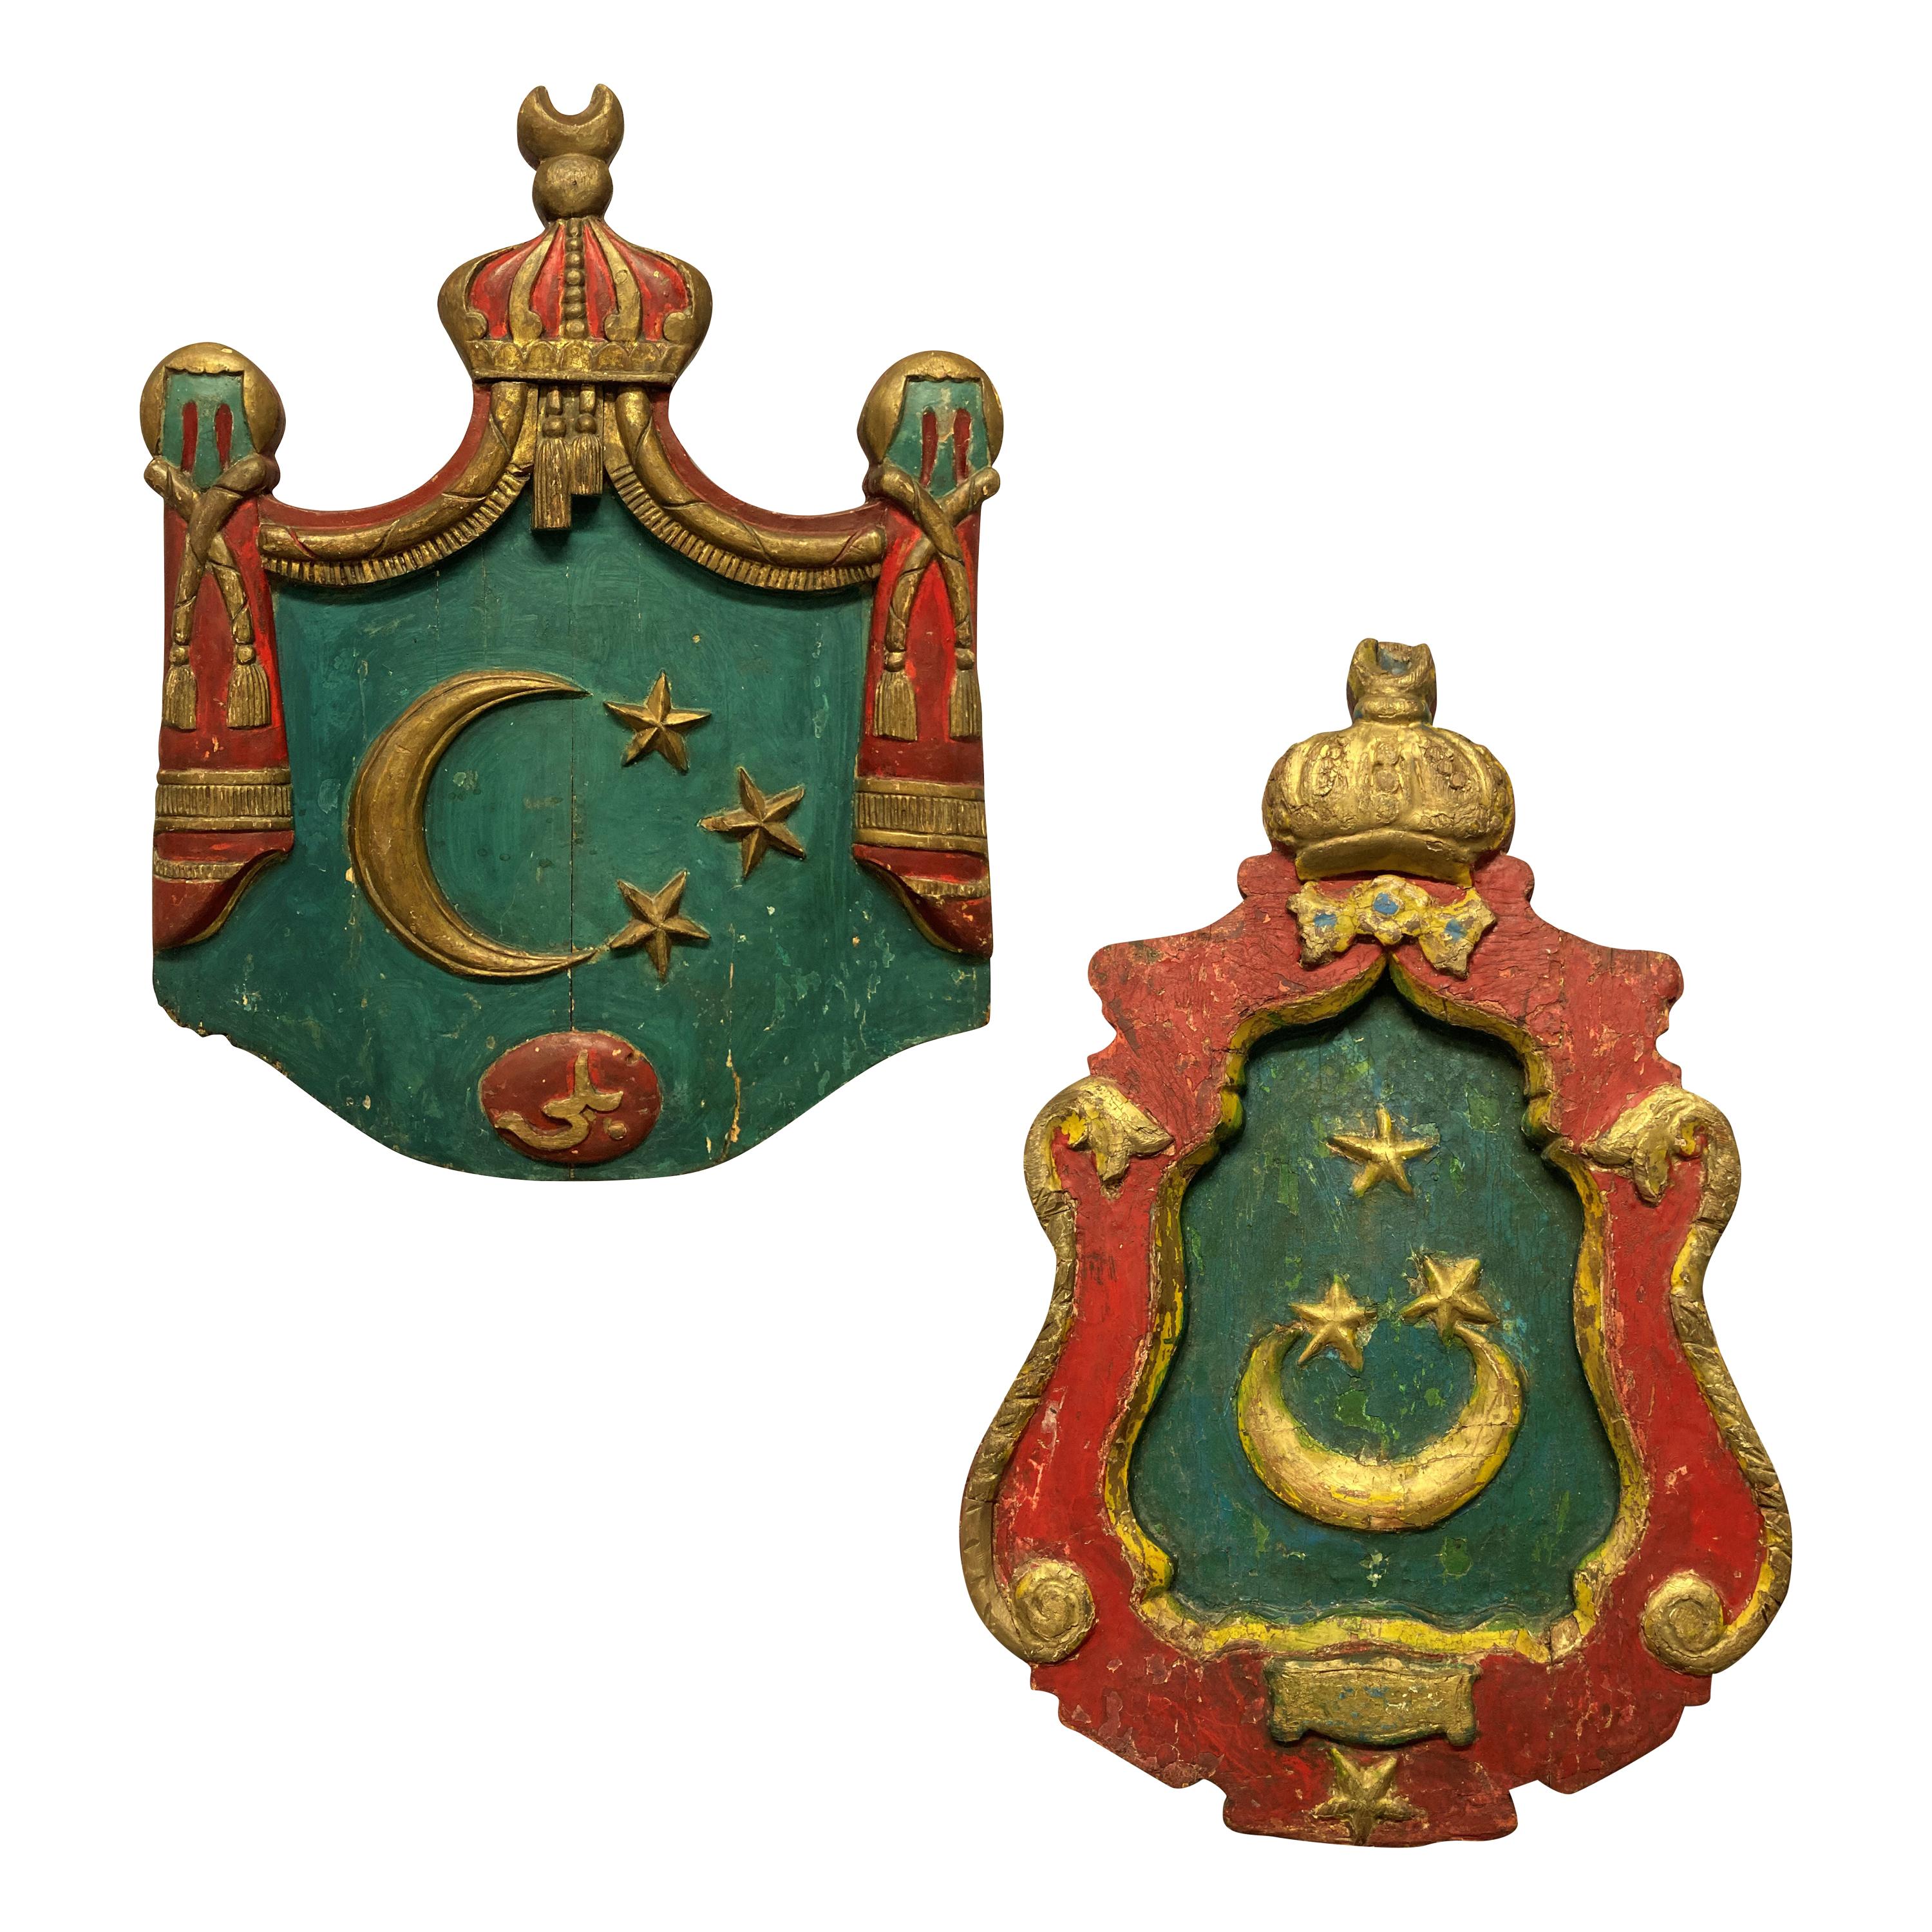 Pair of Rare Islamic Coats of Arms